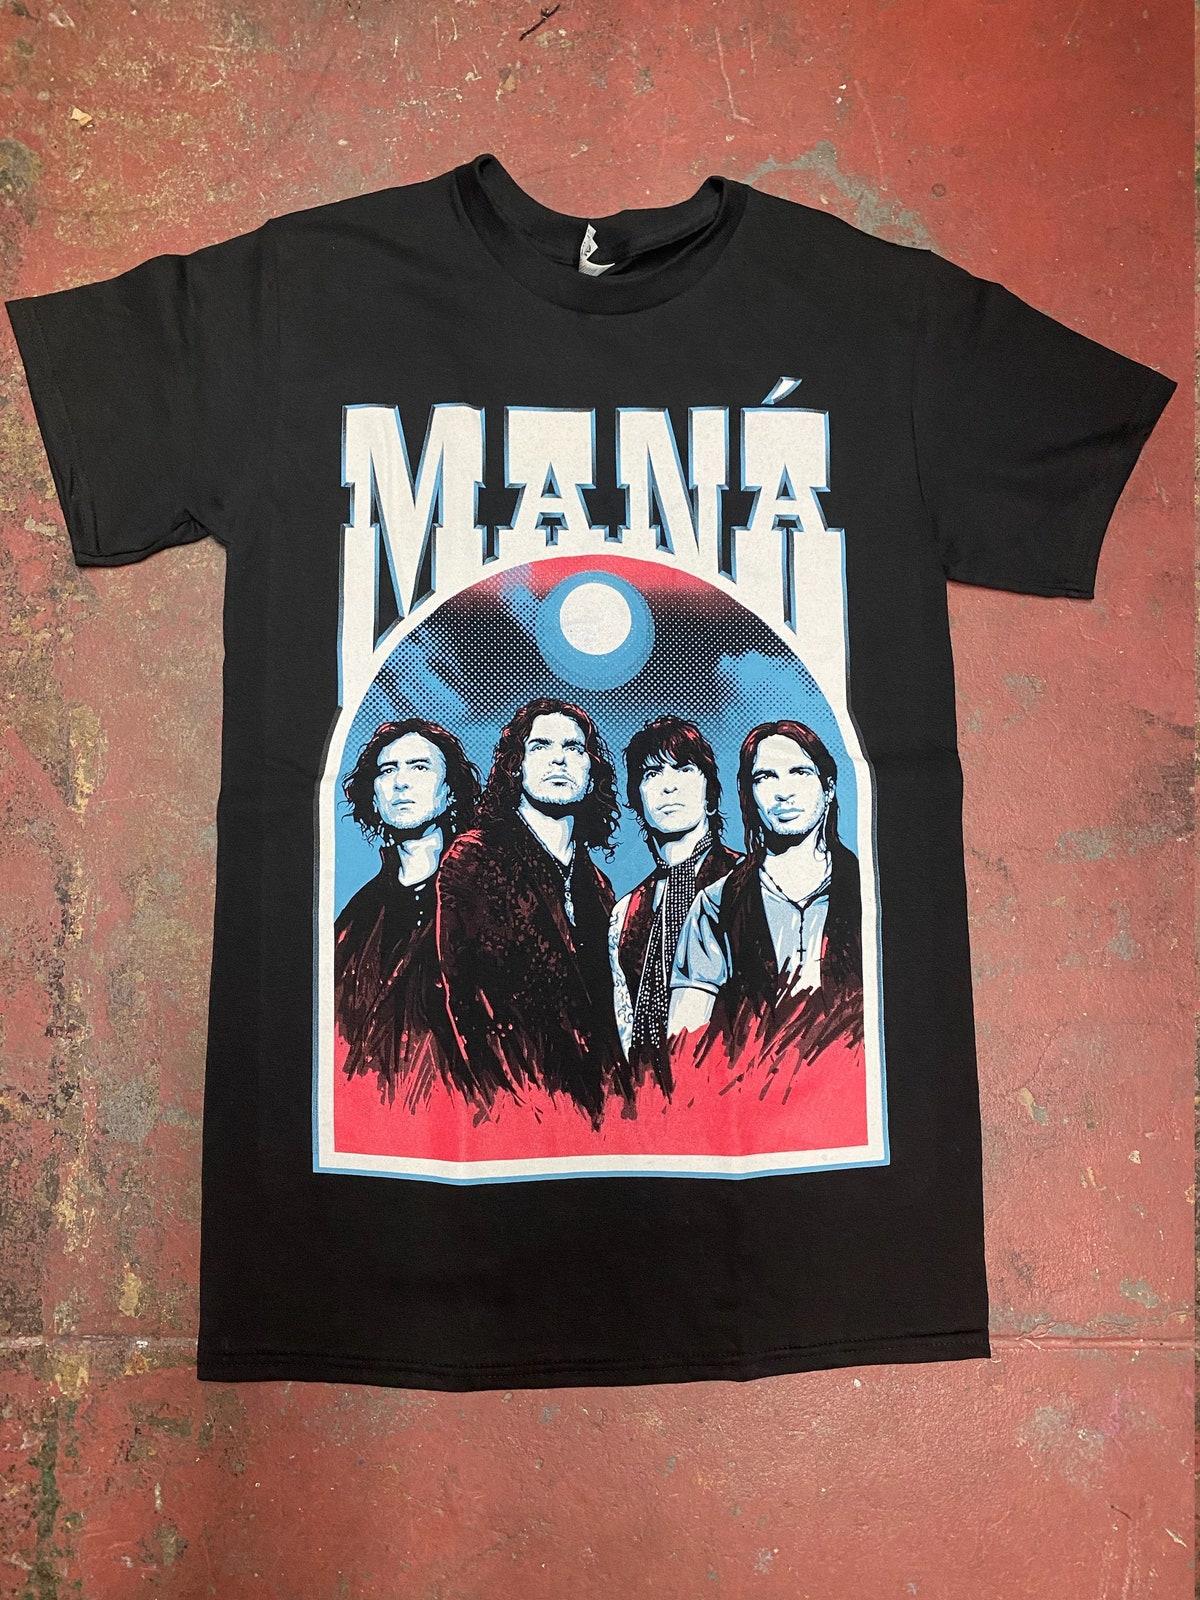 Mana Band Group Photo T-shirt For Rock Music Fans